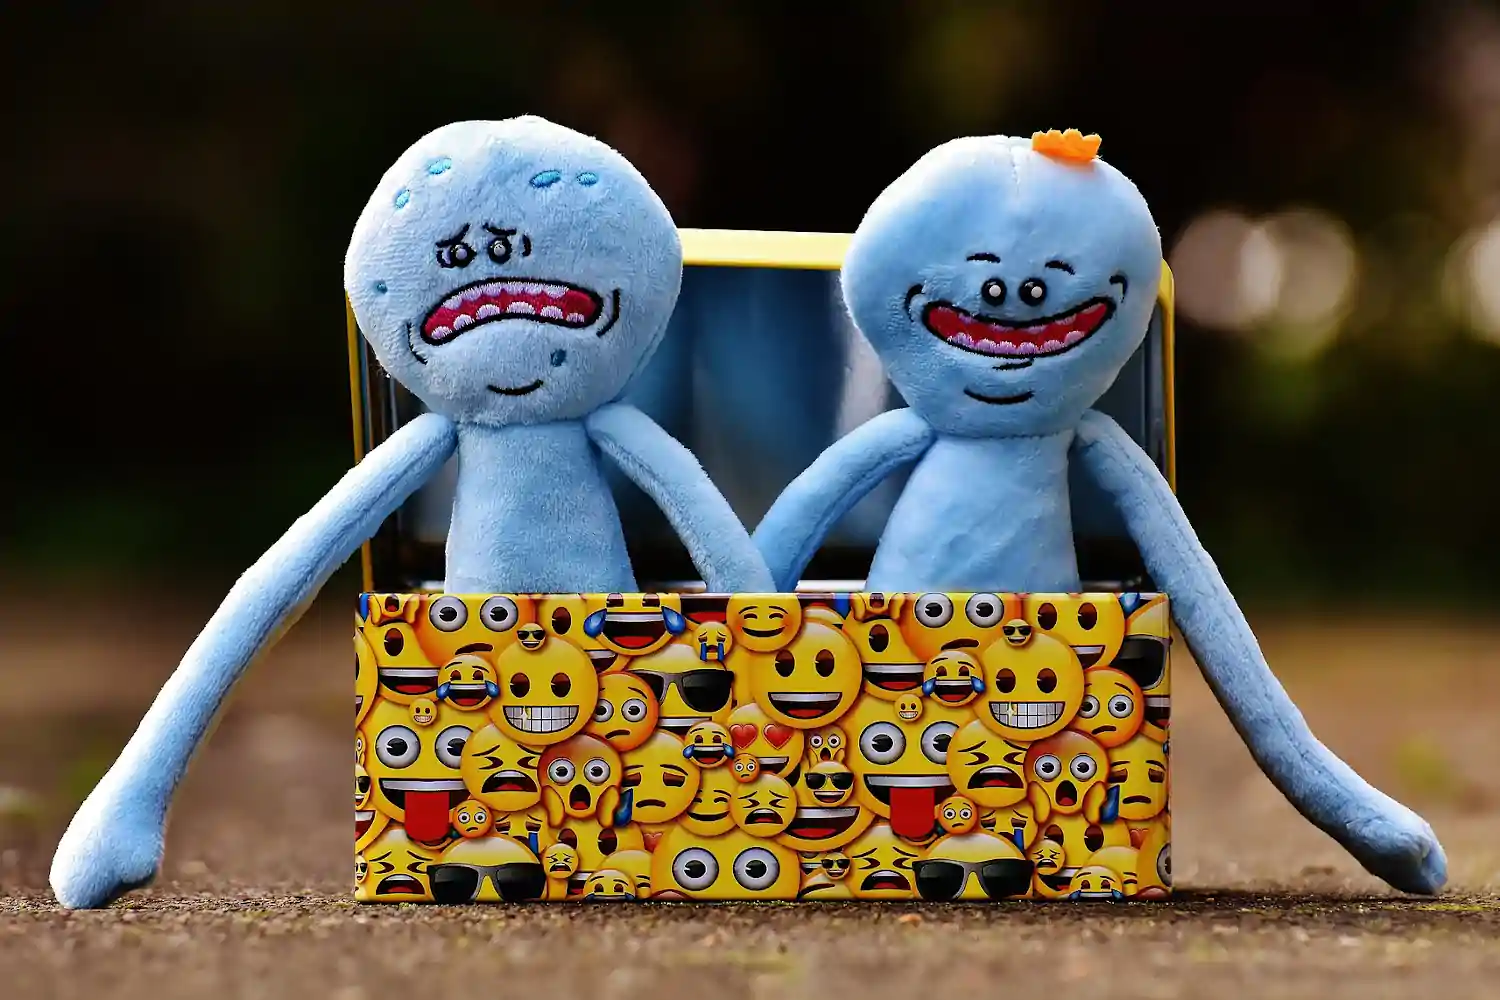 Rick and Morty as plushies sitting in a tin covered with smiley faces